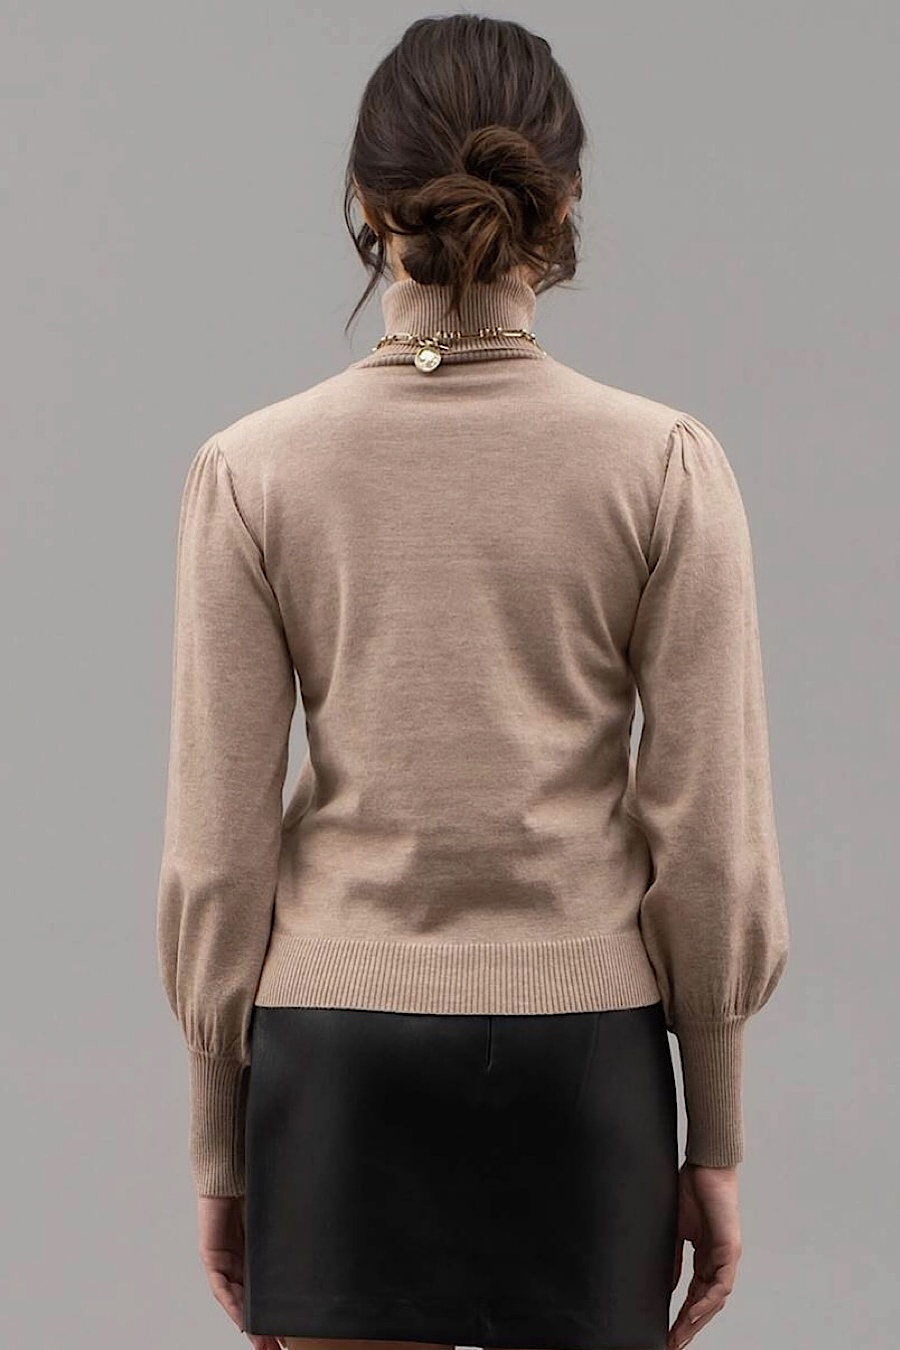 Day to Day Turtleneck Knit Top